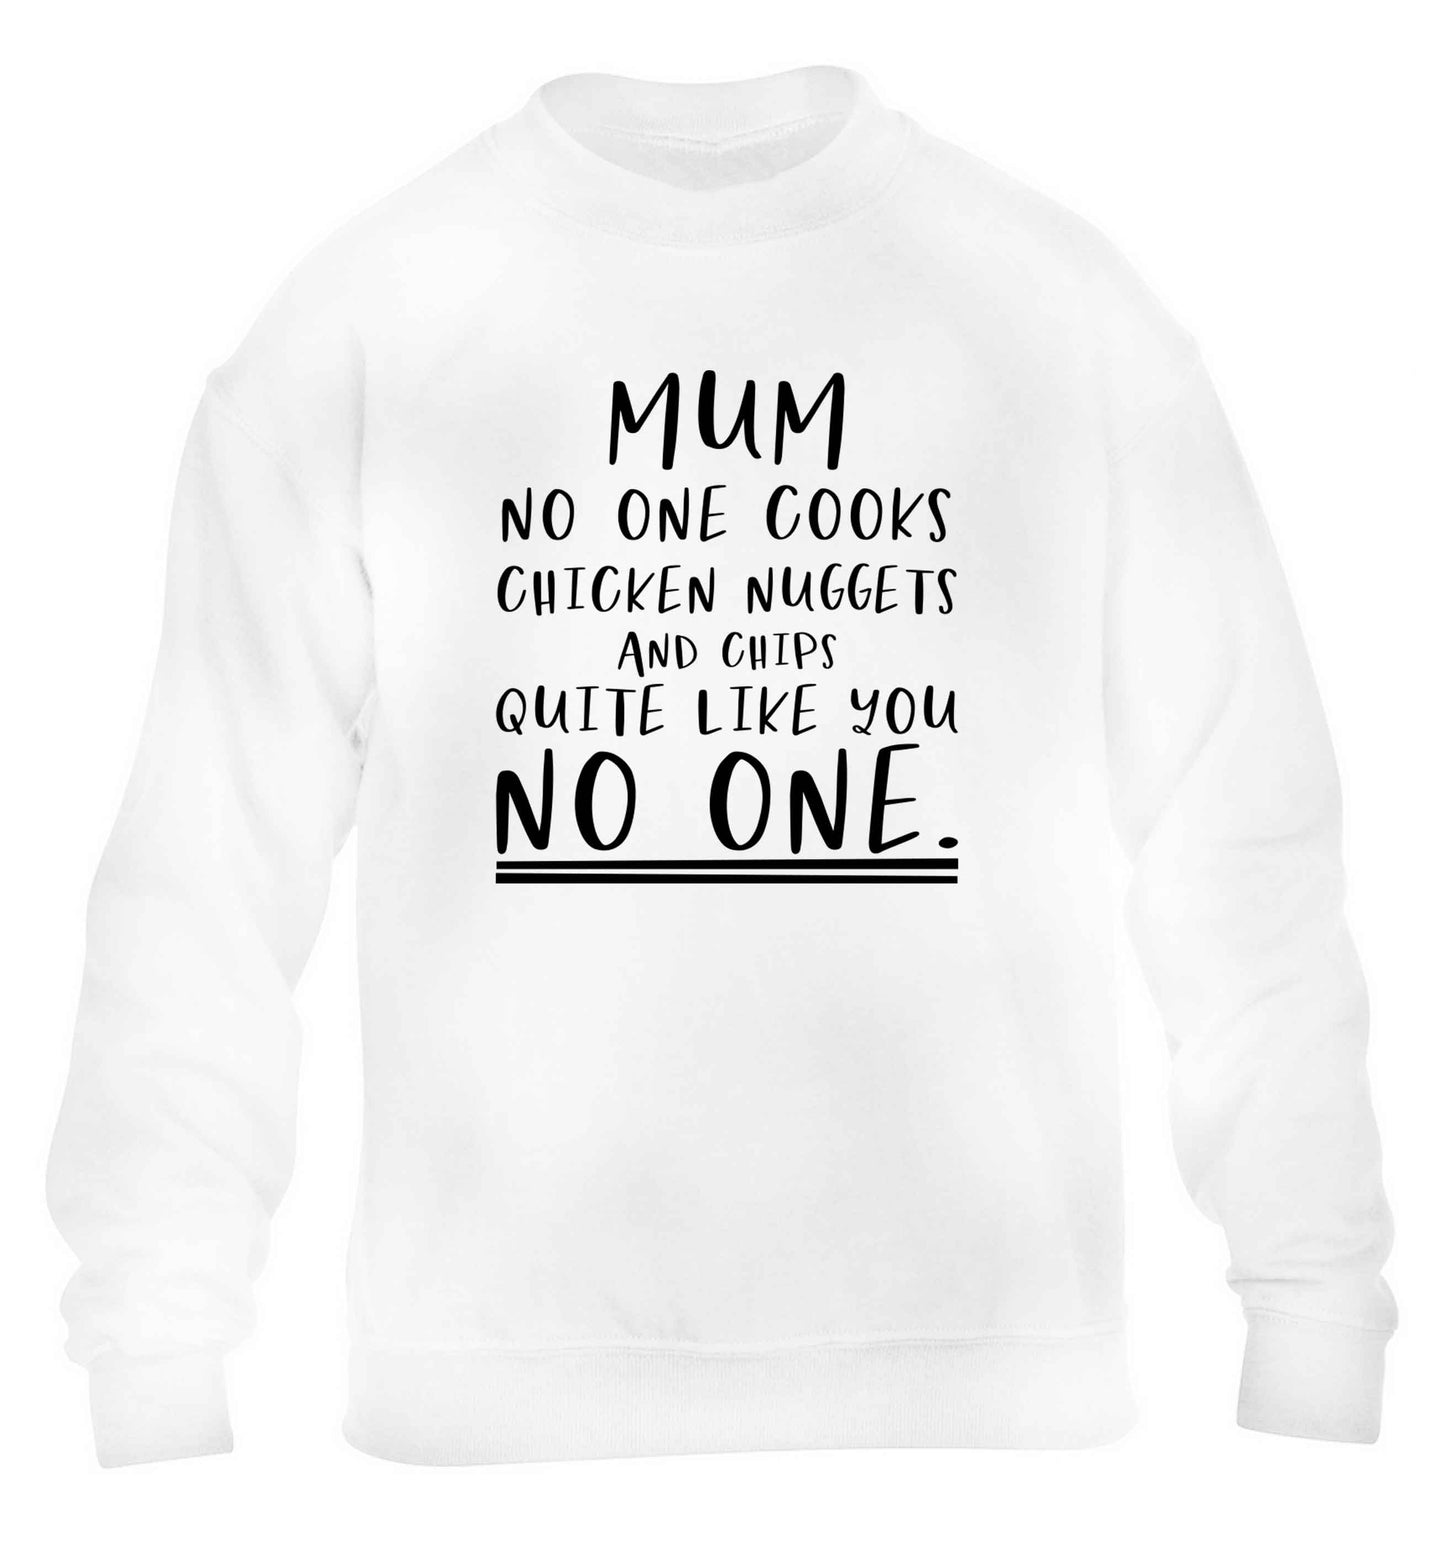 Super funny sassy gift for mother's day or birthday!  Mum no one cooks chicken nuggets and chips like you no one children's white sweater 12-13 Years